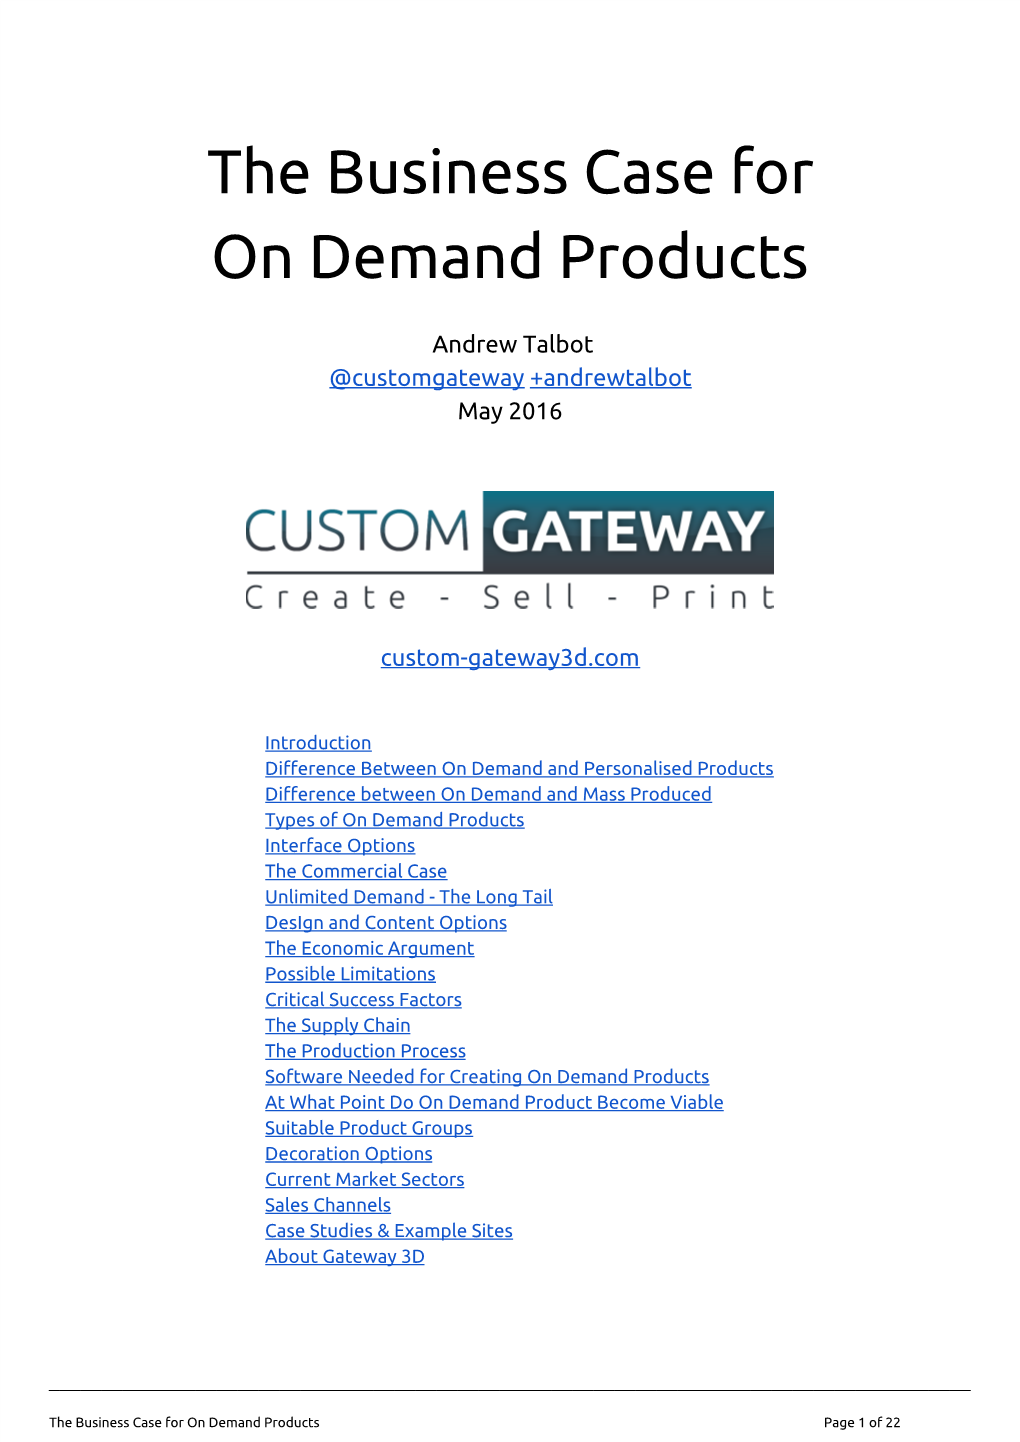 The Business Case for on Demand Products